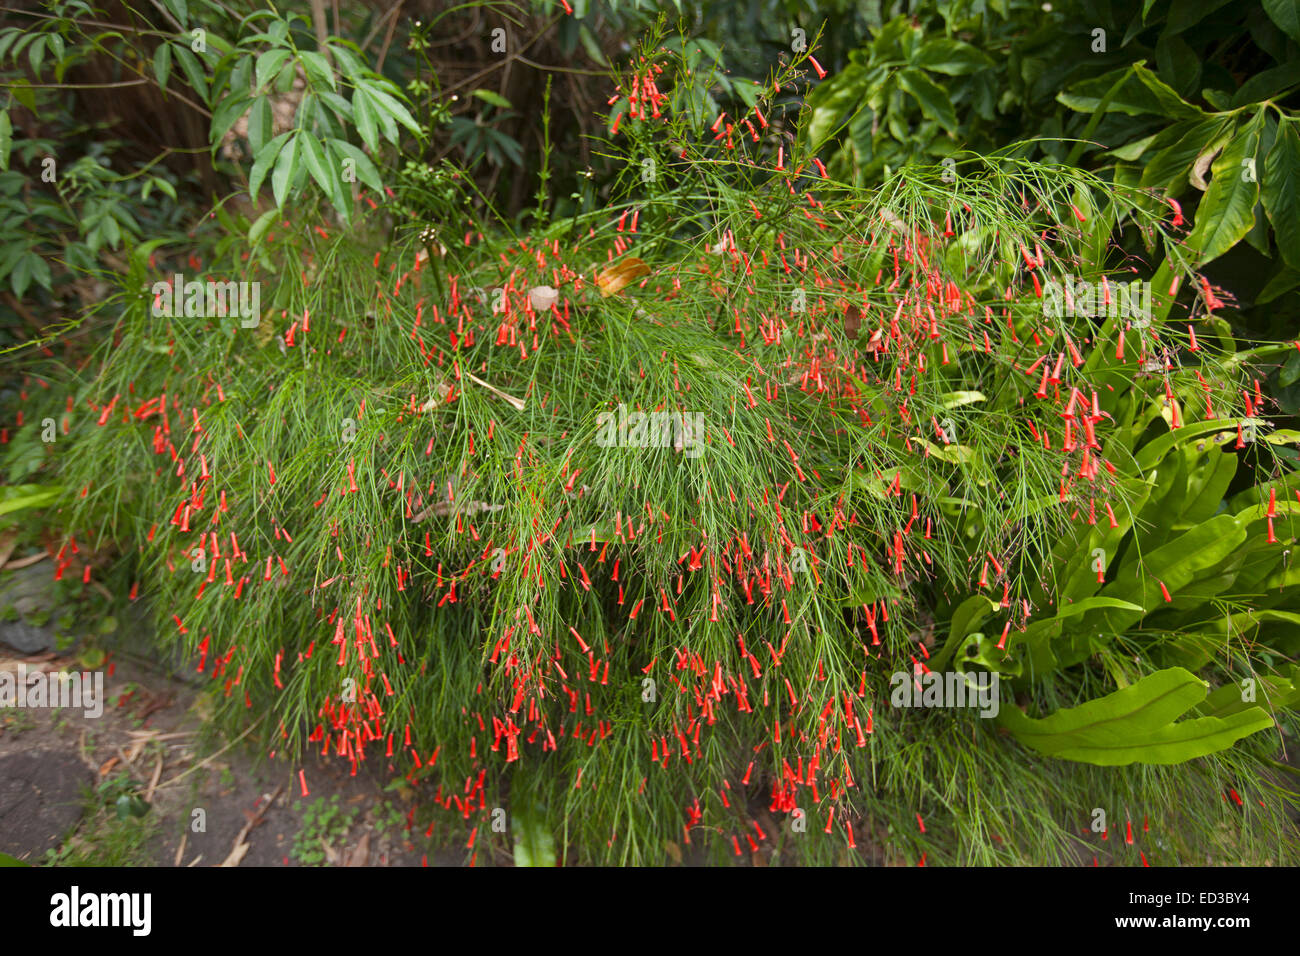 Russelia equisetiformis, a shrub with weeping habit and mass of small tubular red flowers among dense emerald green foliage Stock Photo